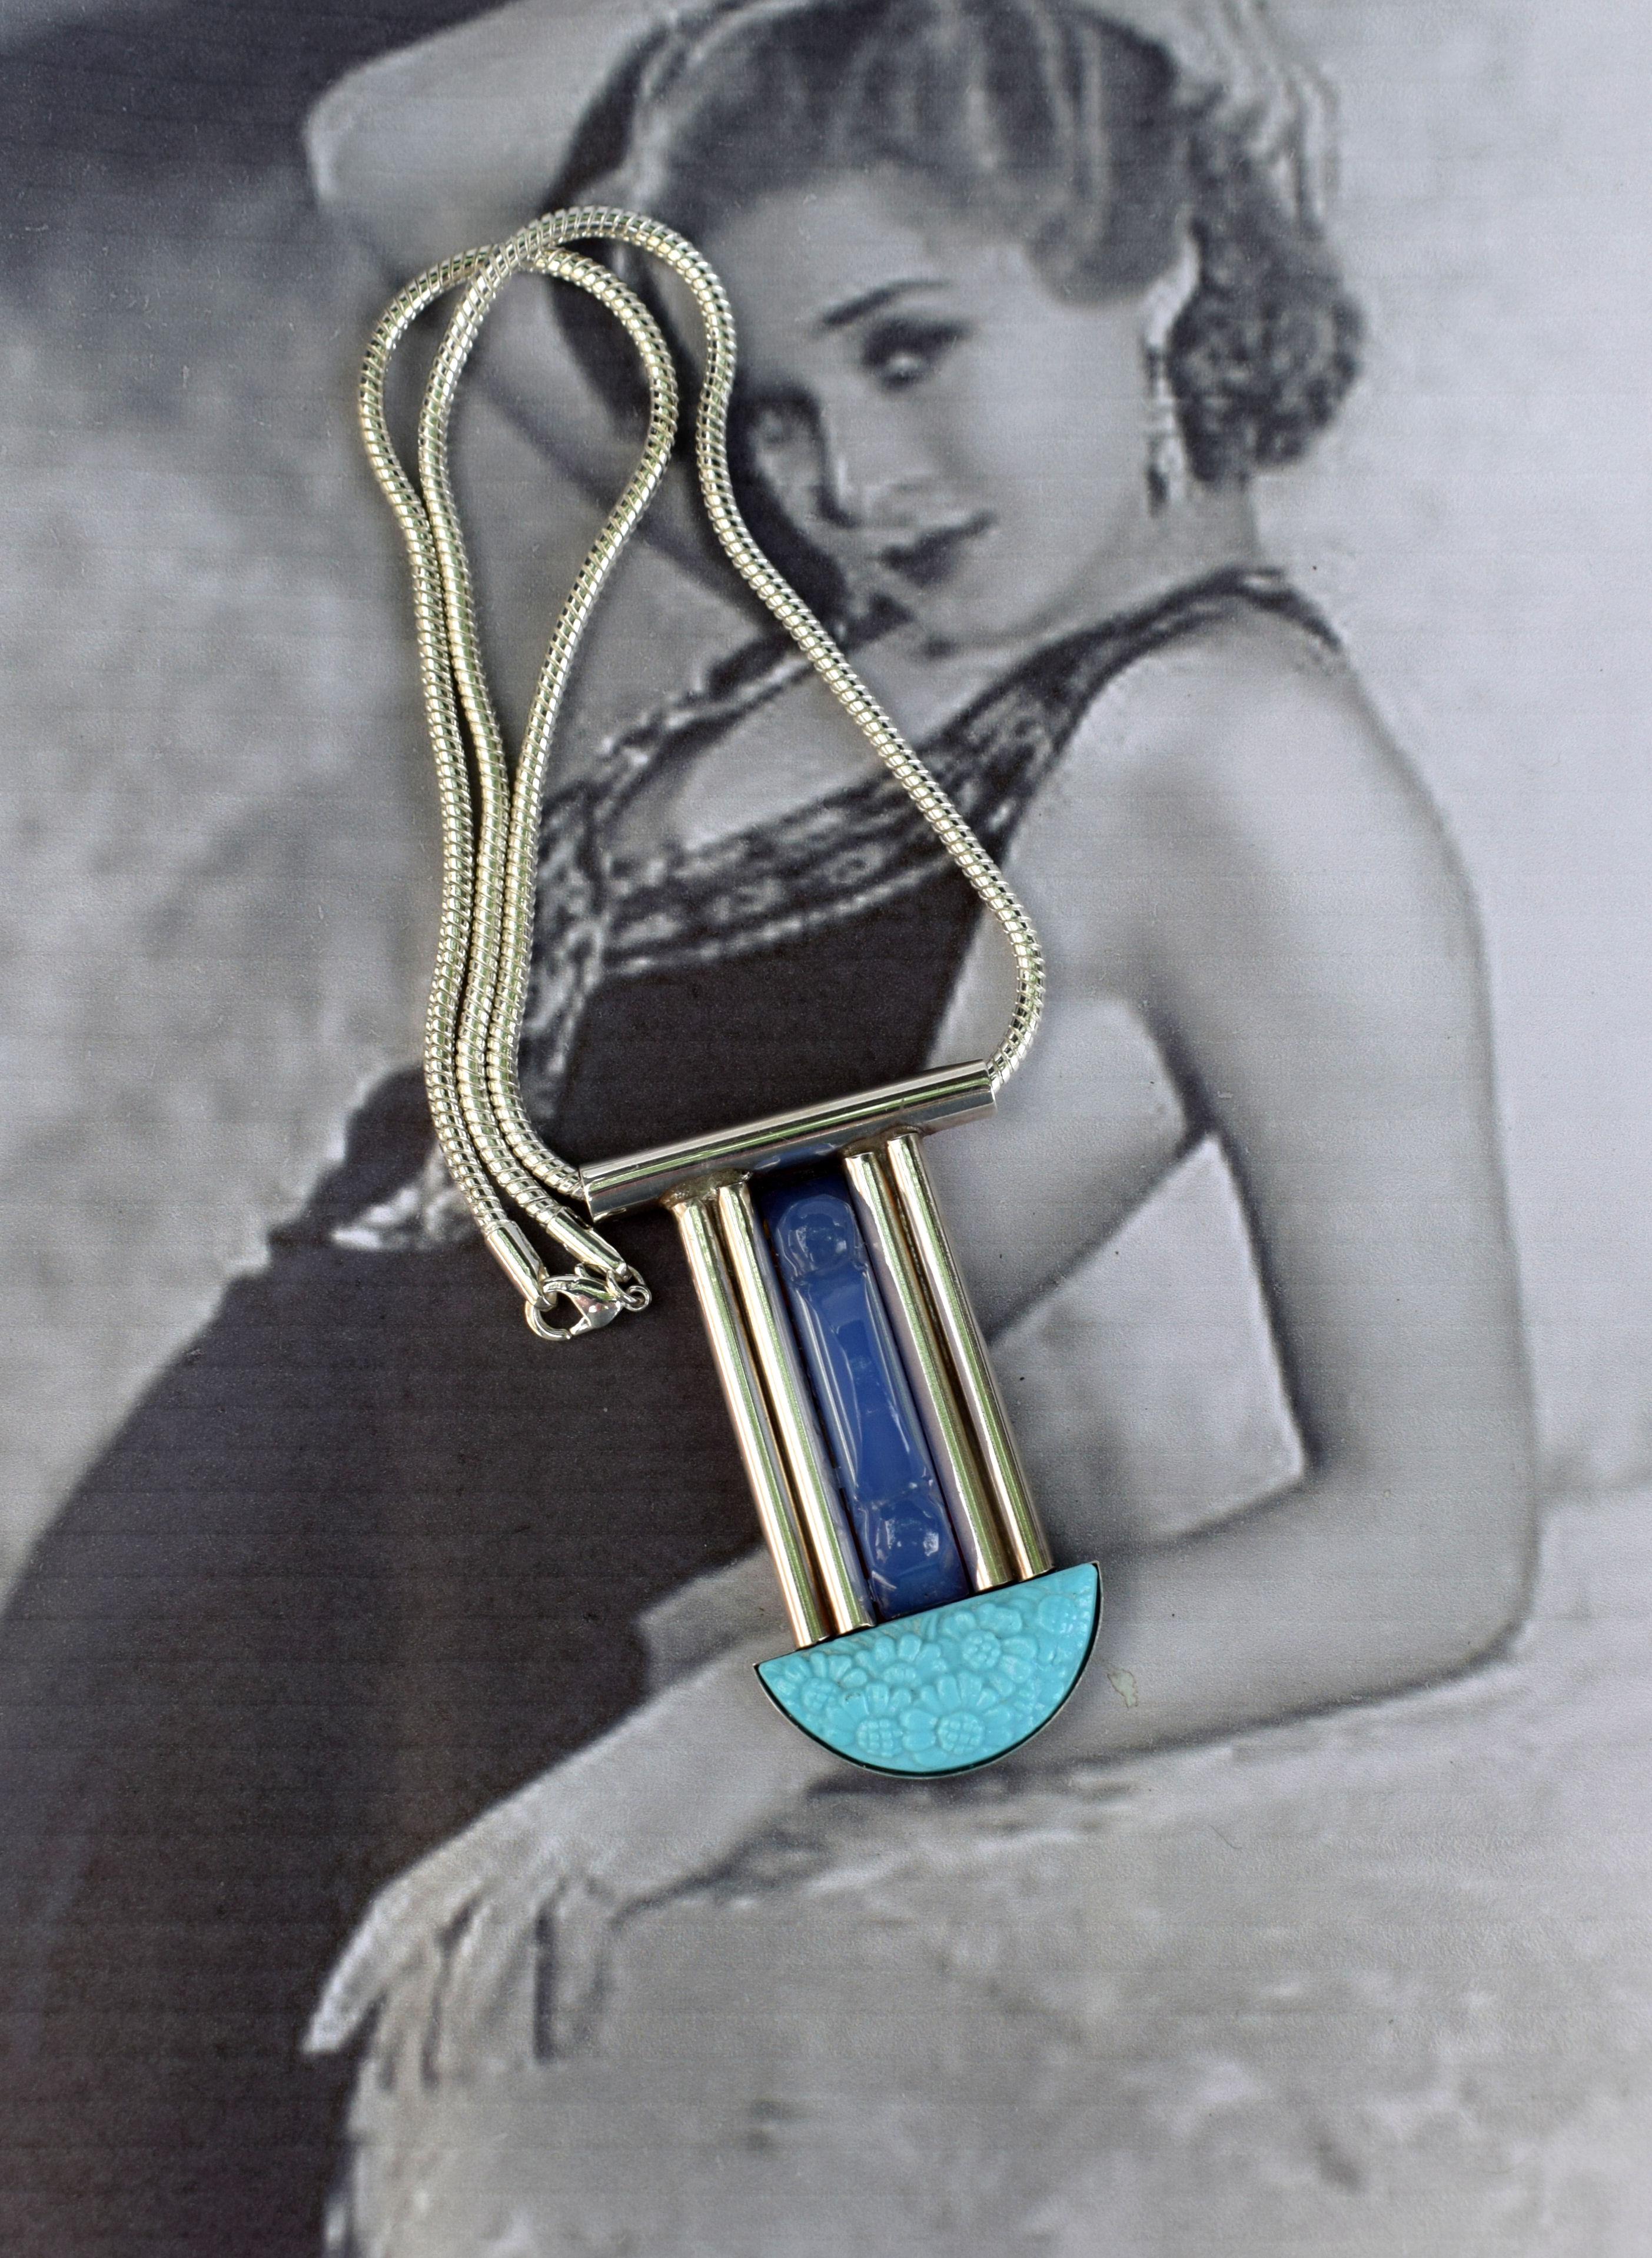 Fabulous French Modernist  Art Deco statement pendant necklace. This necklace is so so elegant and stylish, perfect for either a dressy evening or bohemian day wear. Features blue lapis carved centre accent with a blue Galalith 1930's vintage